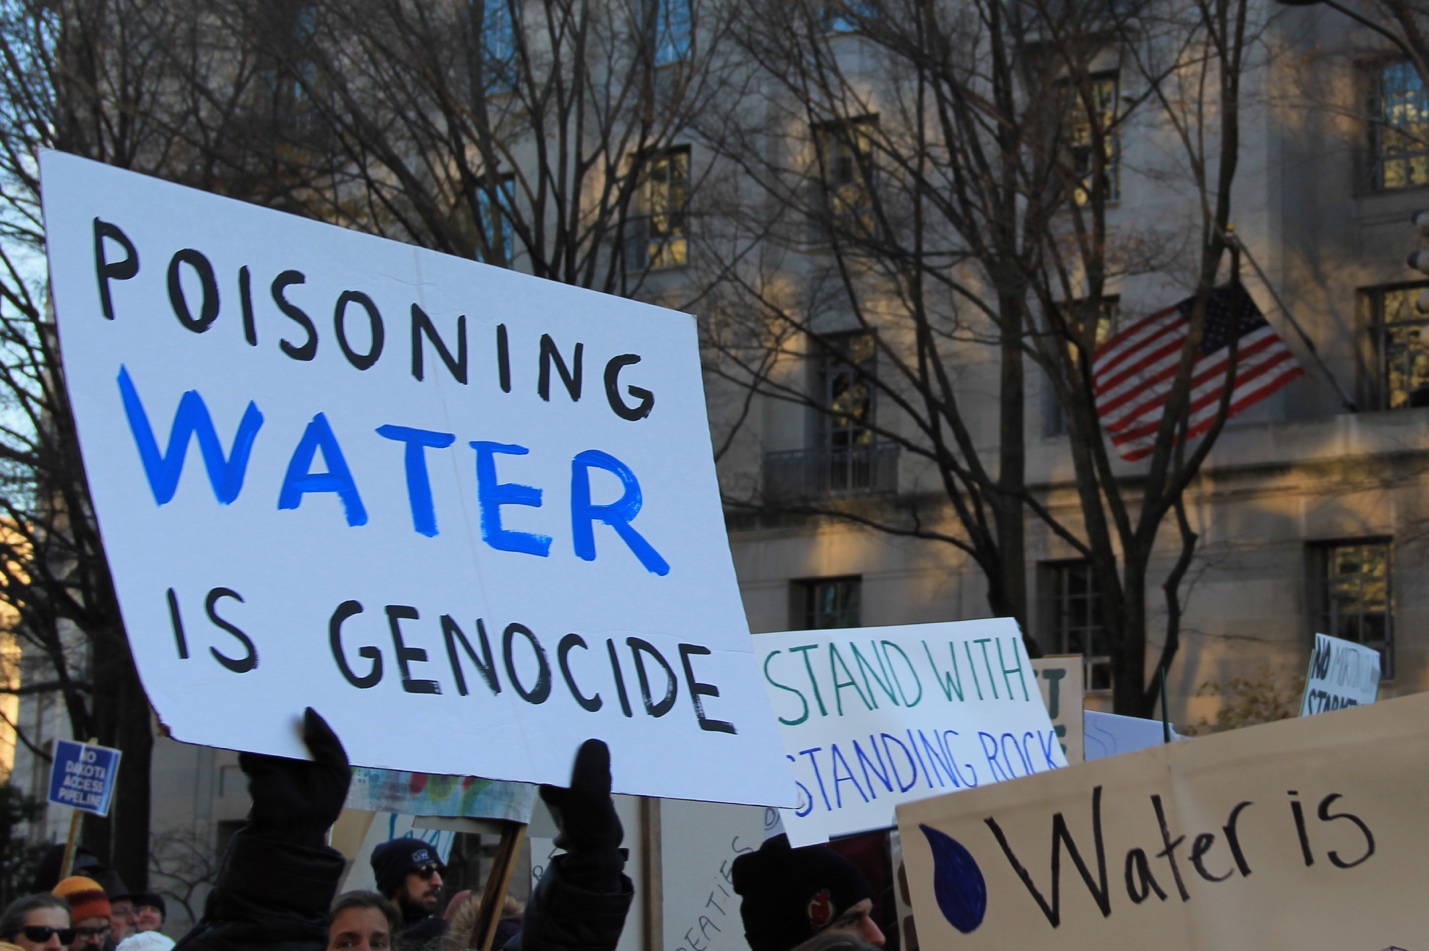 water%20rights%20images/poisoning_water_is_genocide_-_stand_with_standing_rock.jpg